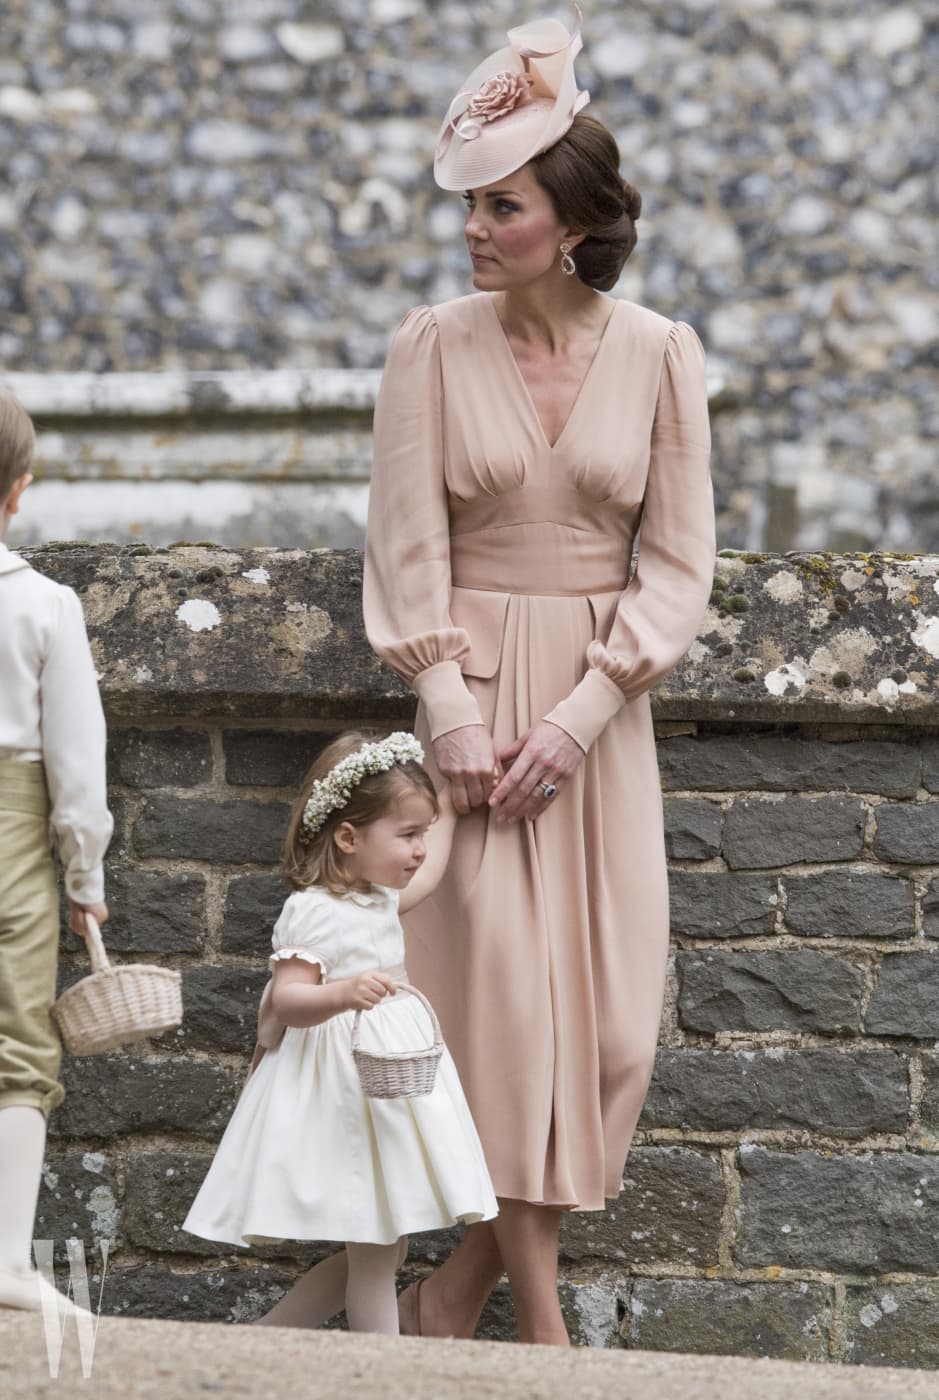 ENGLEFIELD GREEN, ENGLAND - MAY 20: Catherine, Duchess of Cambridge speaks to Princess Charlotte after the wedding of Pippa Middleton and James Matthews at St Mark's Church on May 20, 2017 in in Englefield, England. (Photo by Arthur Edwards - WPA Pool/Getty Images)